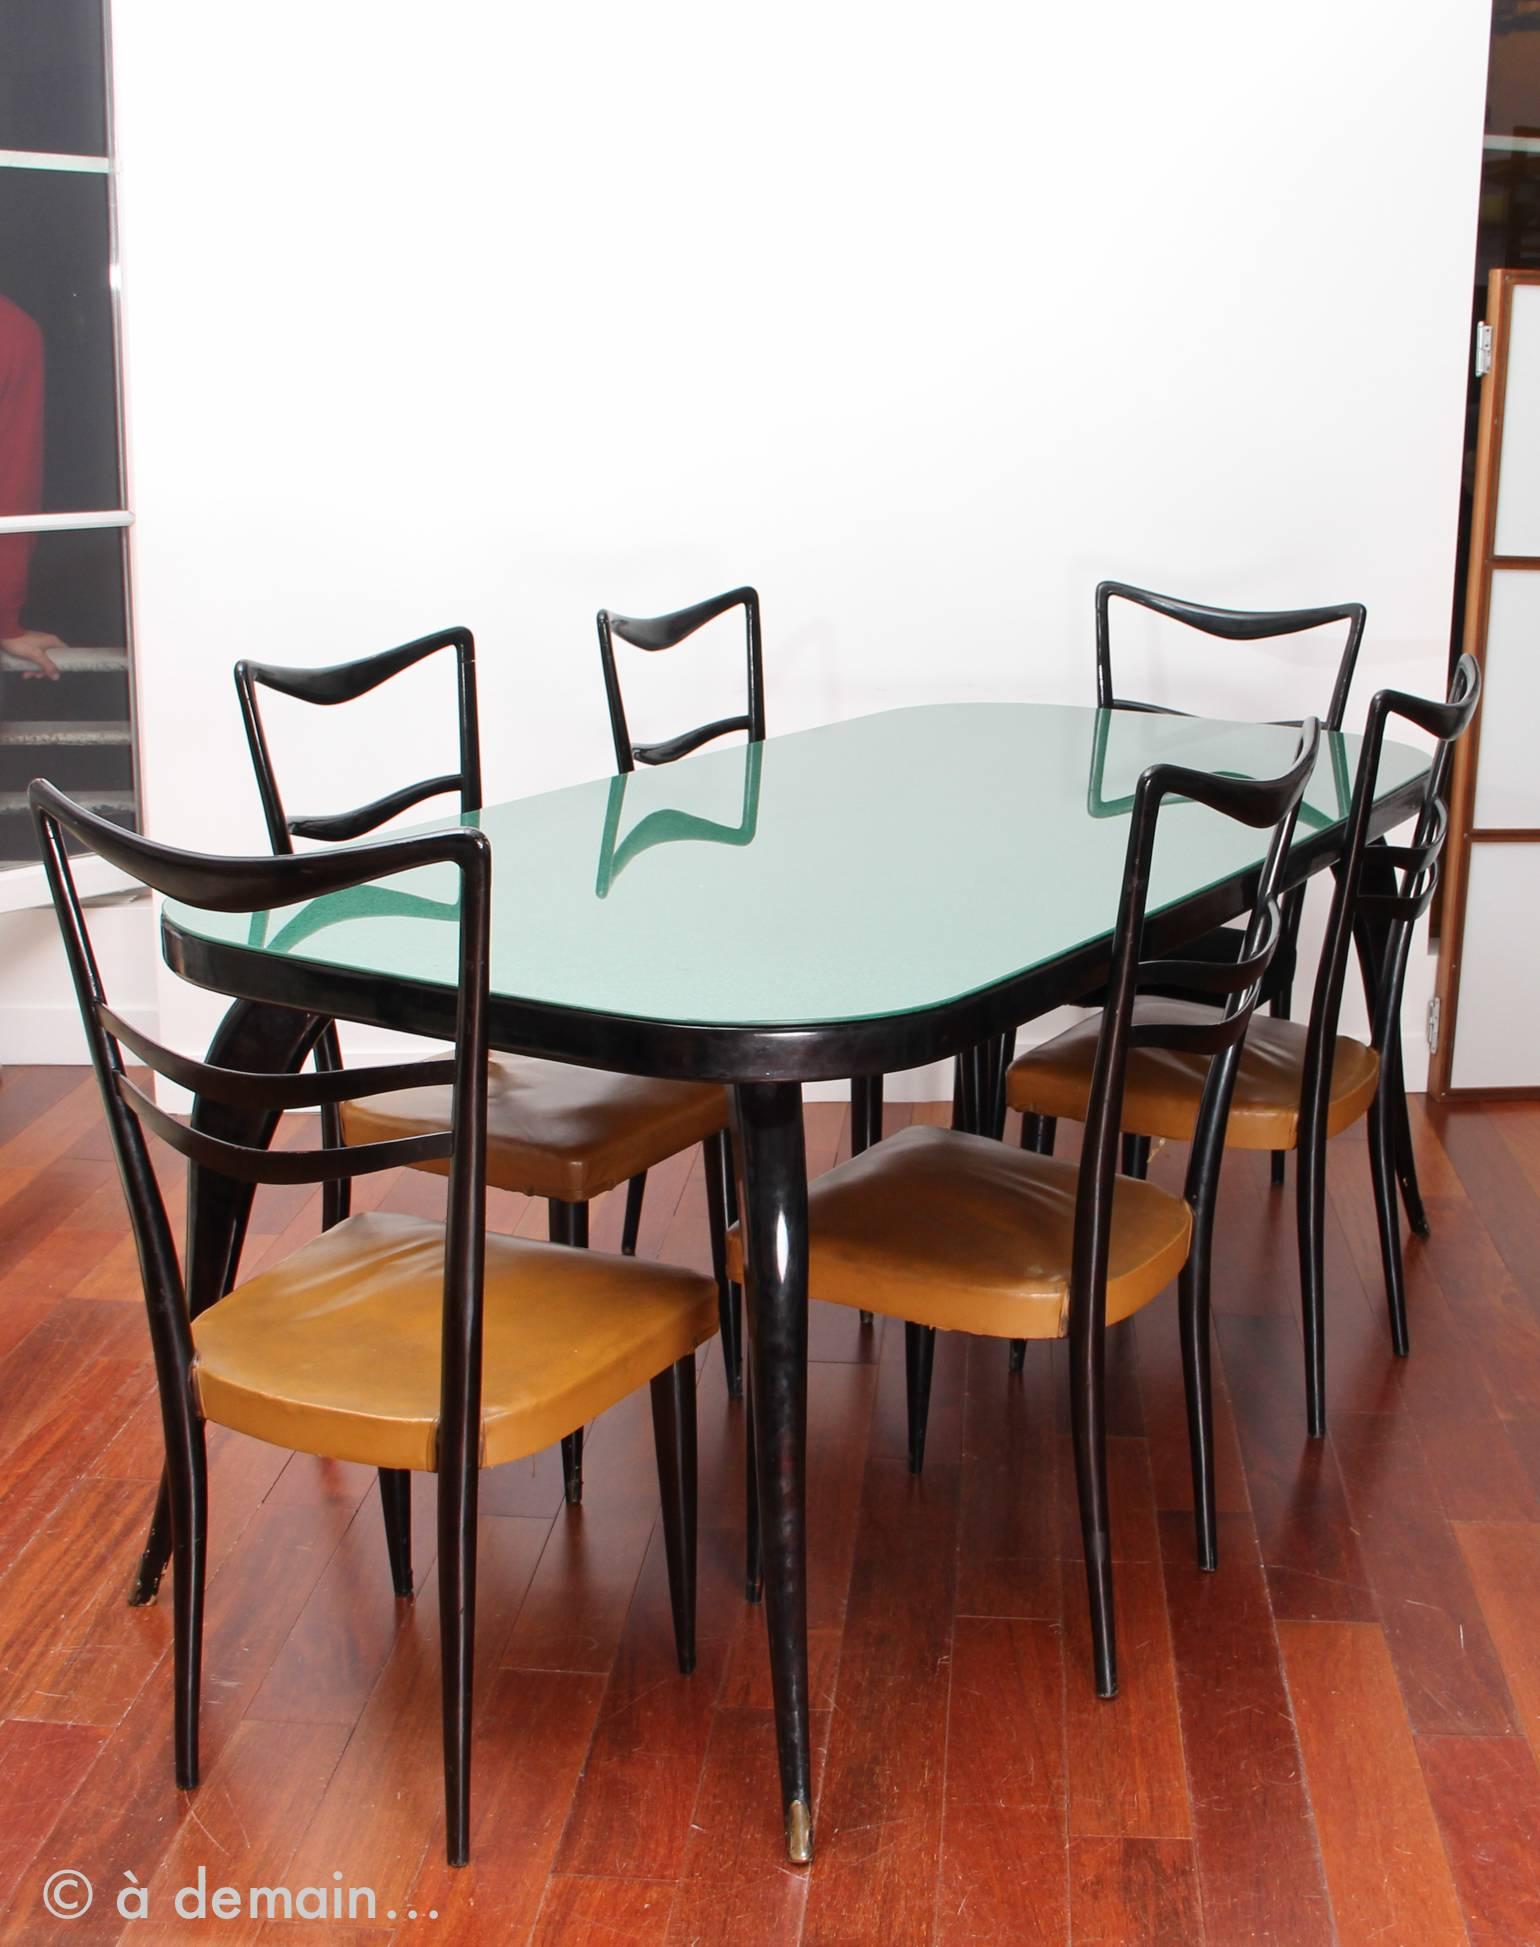 Beautiful Italian dining room set in the style of Paolo Buffa from the 1950s.
Large dining table with green glass tray and dark black lacquered wooden base.
Six wooden chairs: Five with brown leatherette seats and one with black fabric